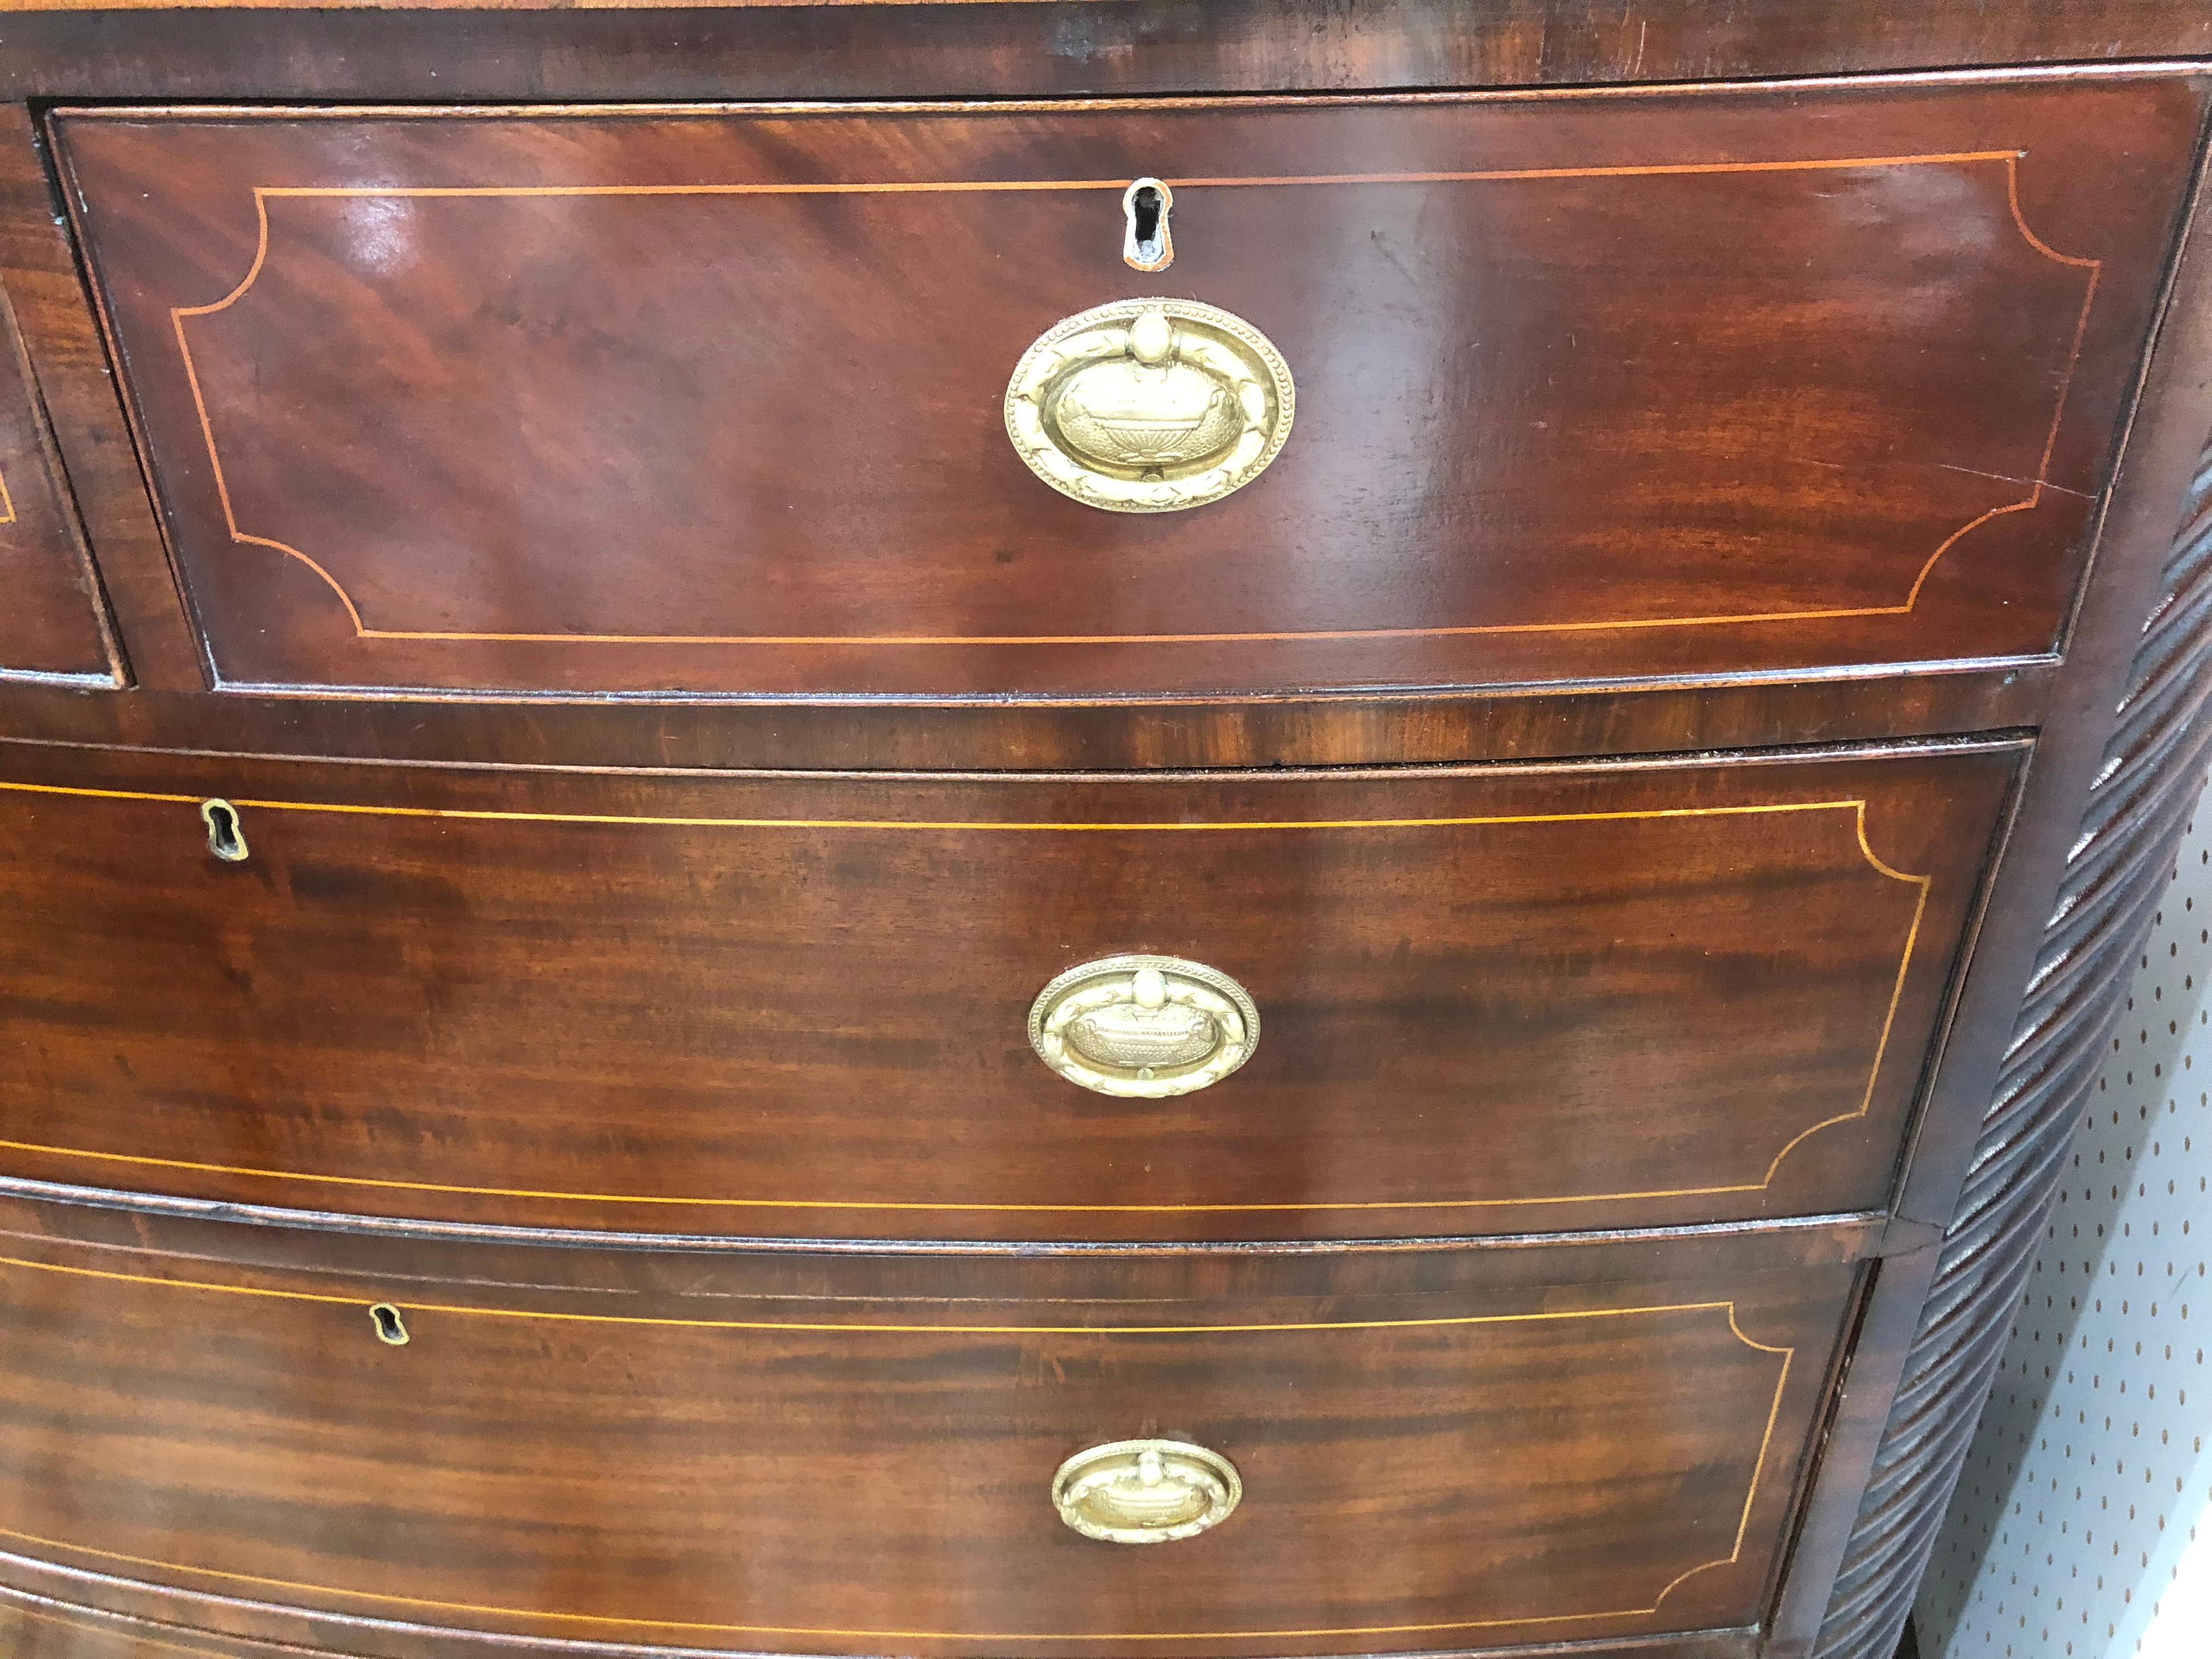 English bow front chest with rope twist edges, line inlay in satinwood on each drawer and top edge, replacement pulls solid brass, and excellent color. Nice bracket feet, drawers work well.